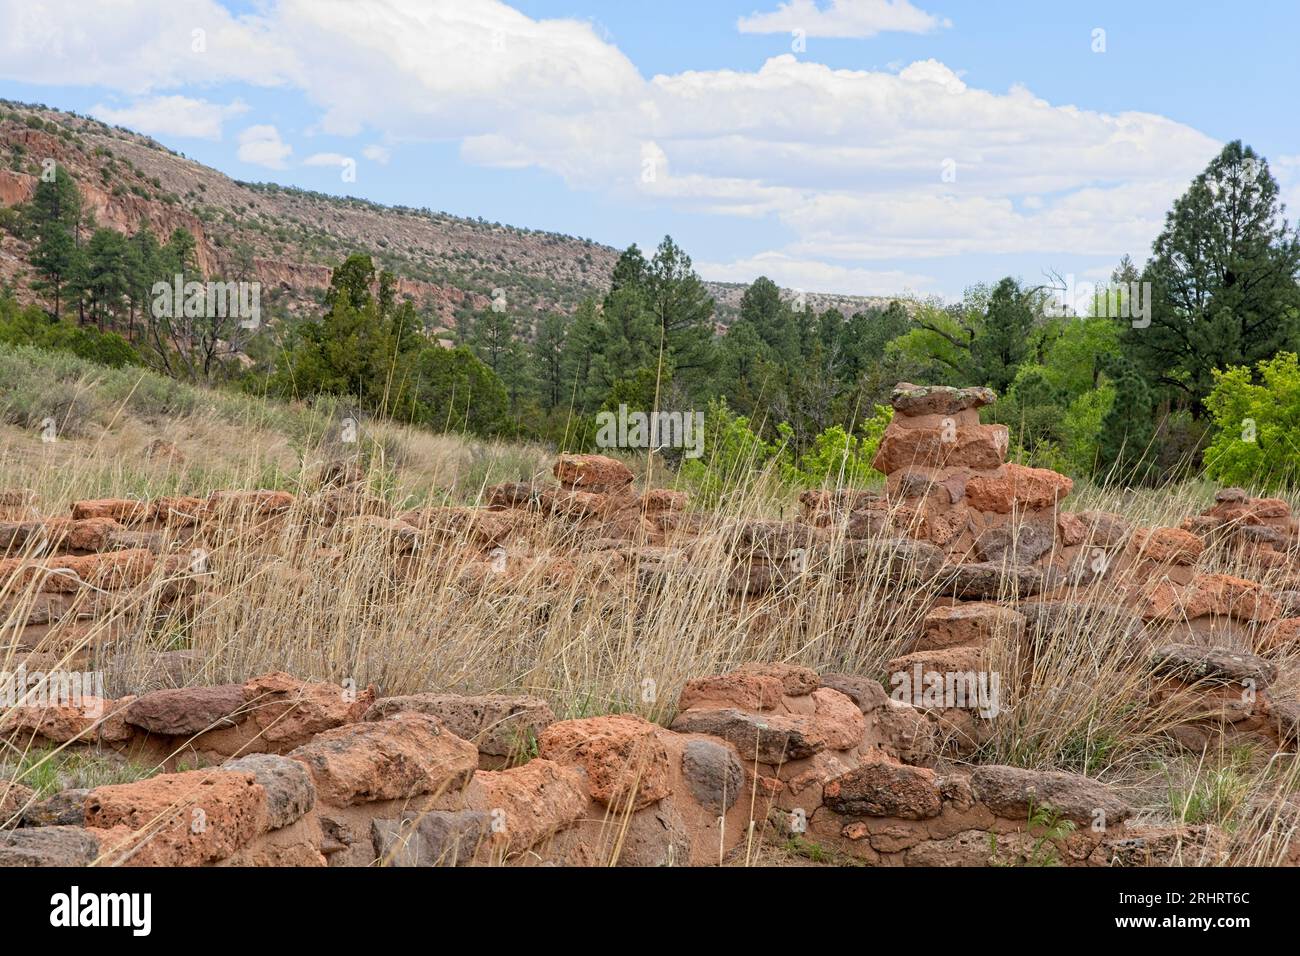 Tall grass cover foundation ruins ancient Puebloan community of  Frijoles canyon  in Bandelier National Monument Stock Photo